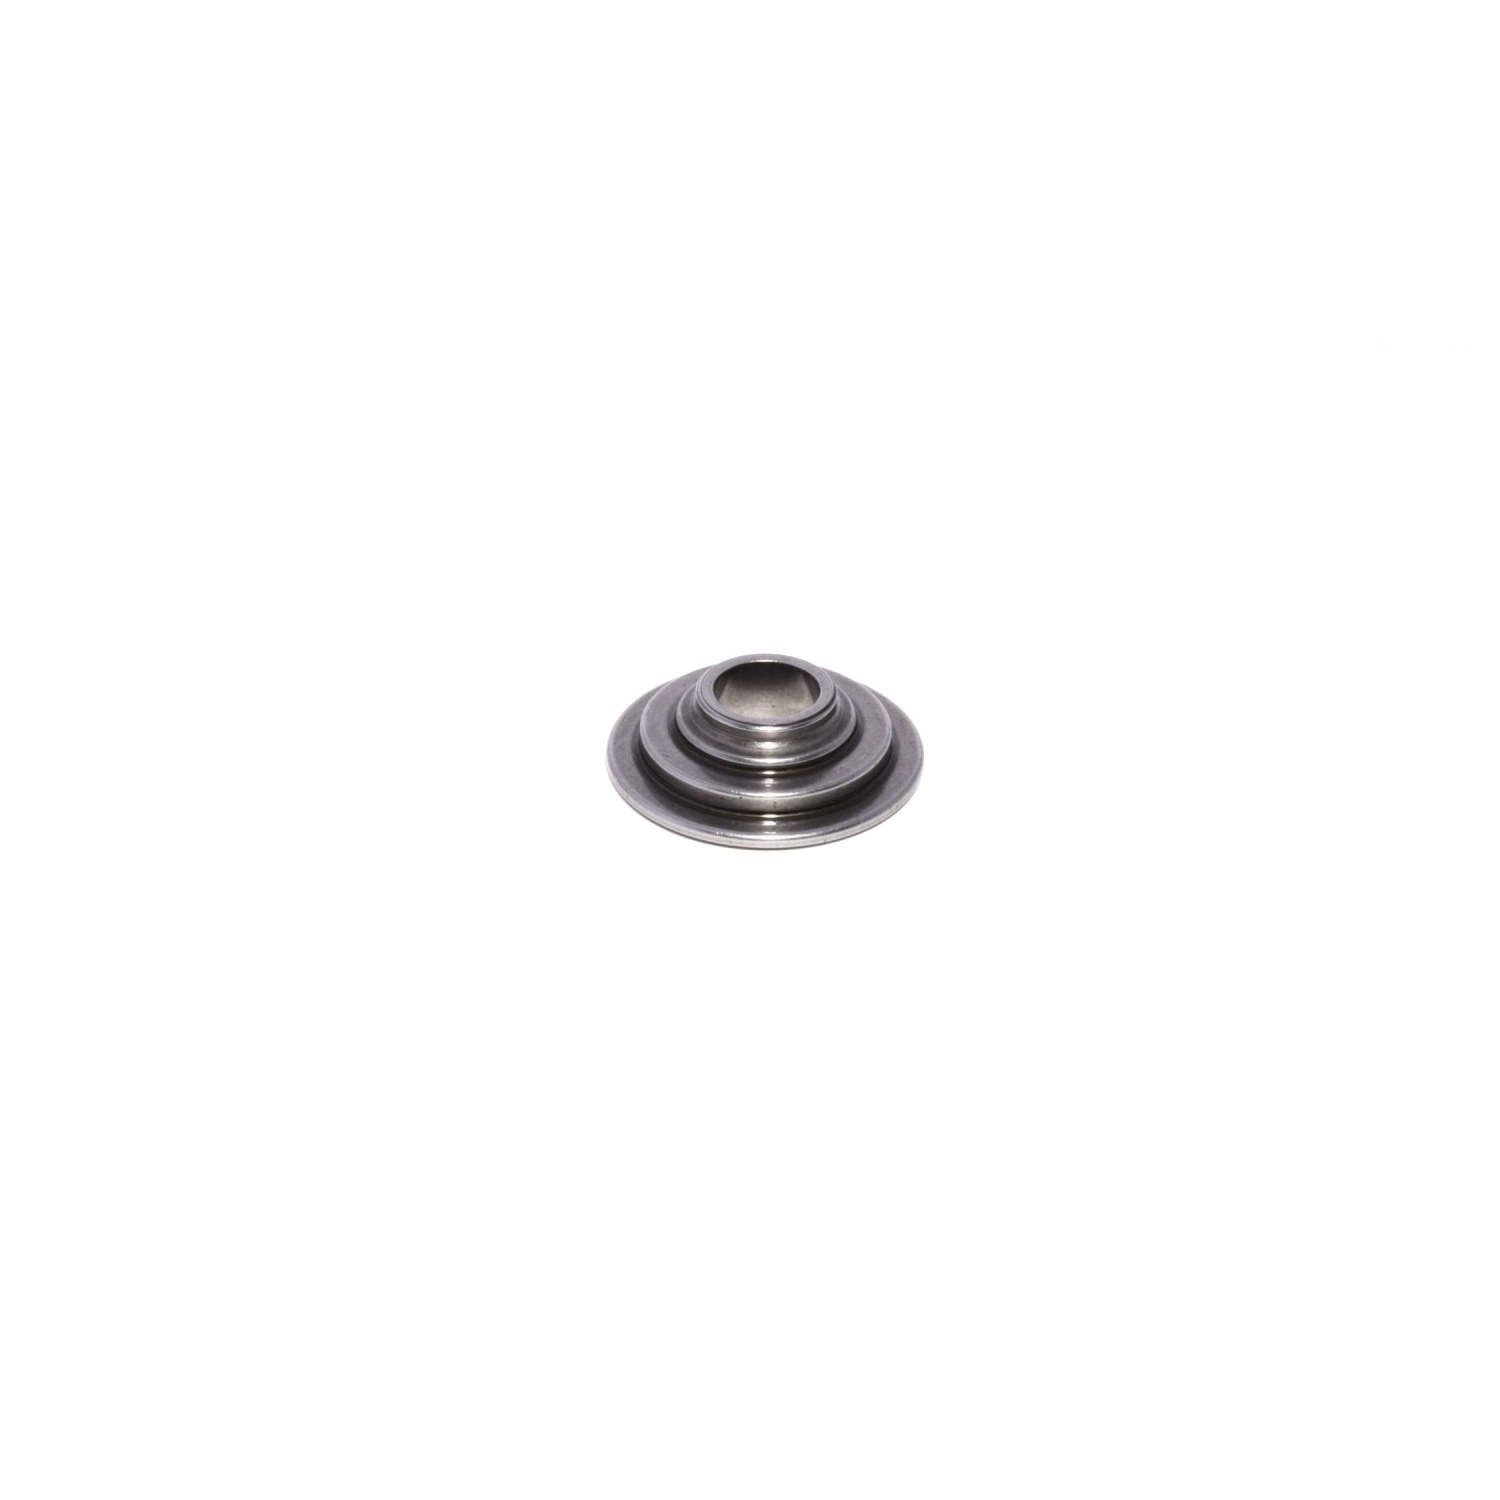 Competition Cams 1750-1 Lightweight Tool Steel Retainer